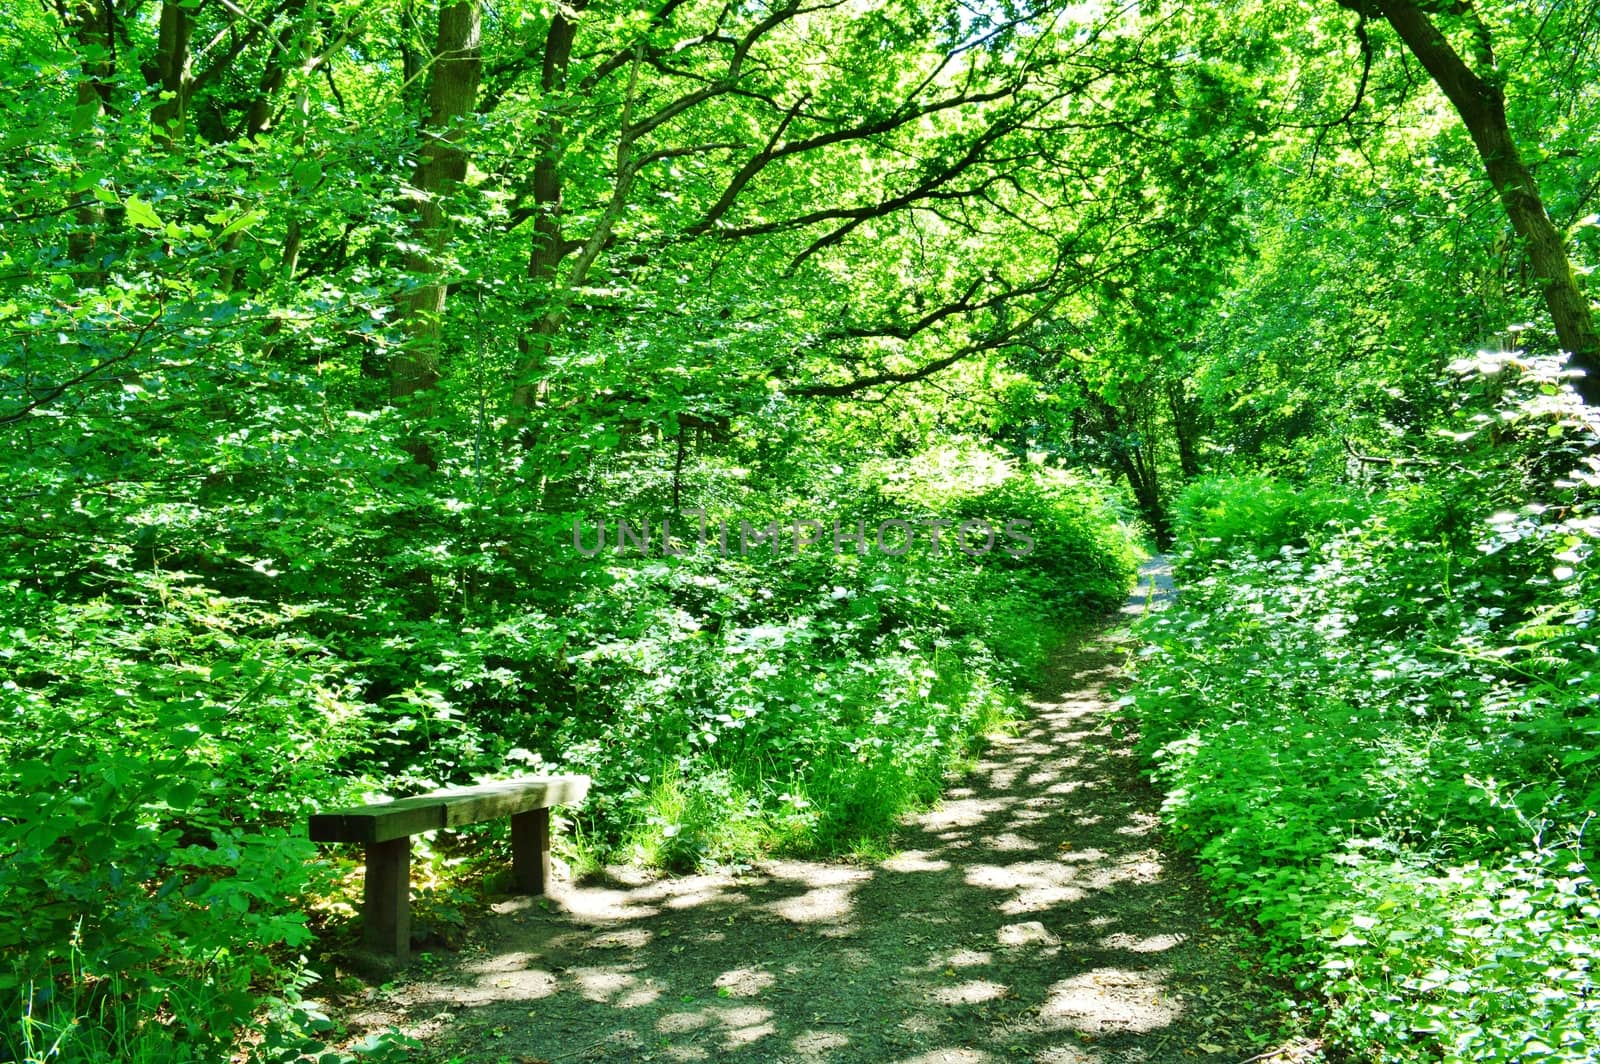 An image of a woodland nature trail.